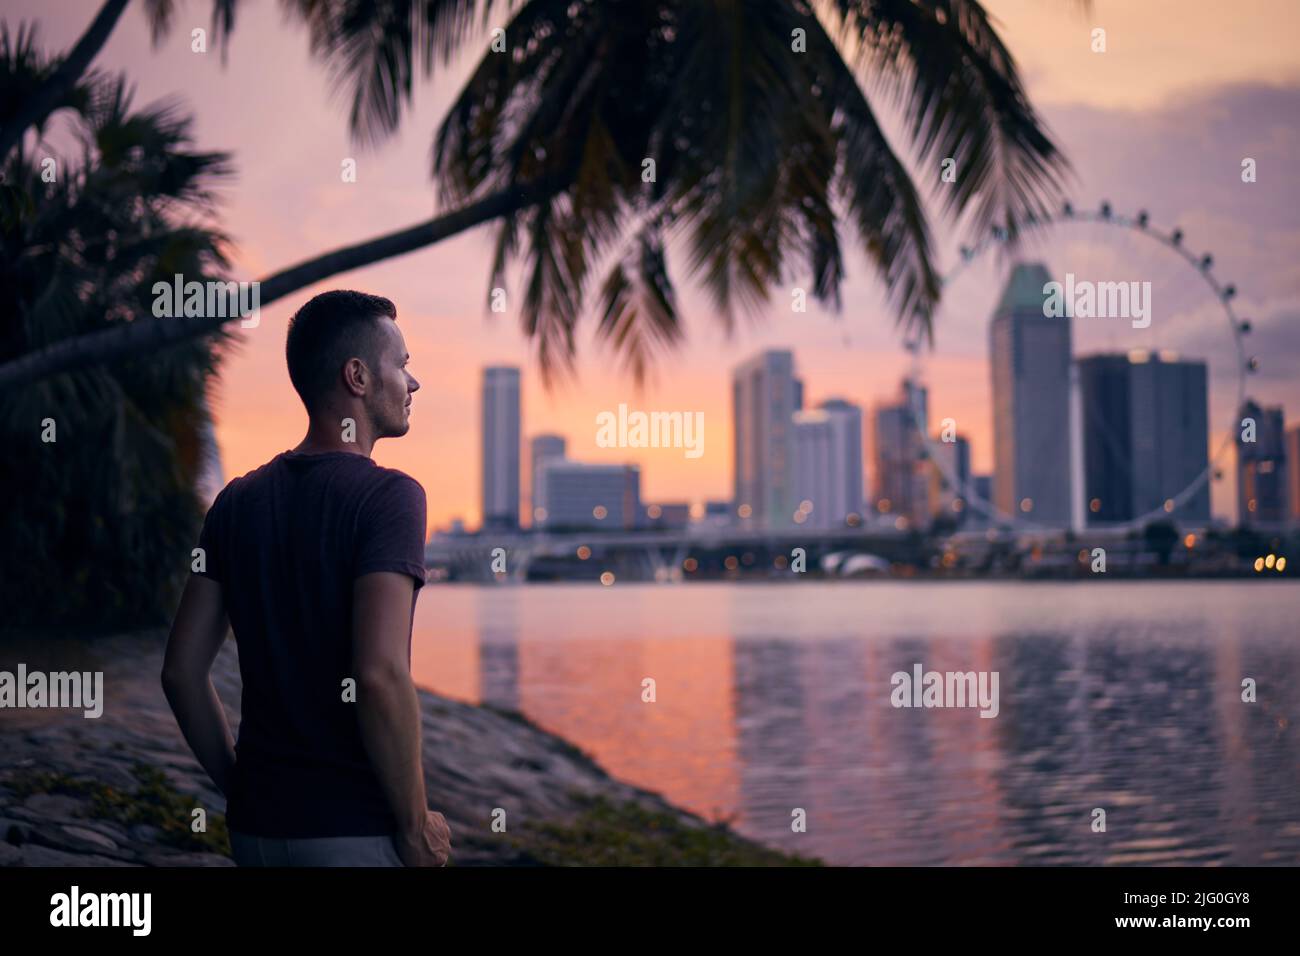 Handsome man standing under palm tree on waterfront of bay and looking at city. Urban skyline at sunset, Singapore. Stock Photo